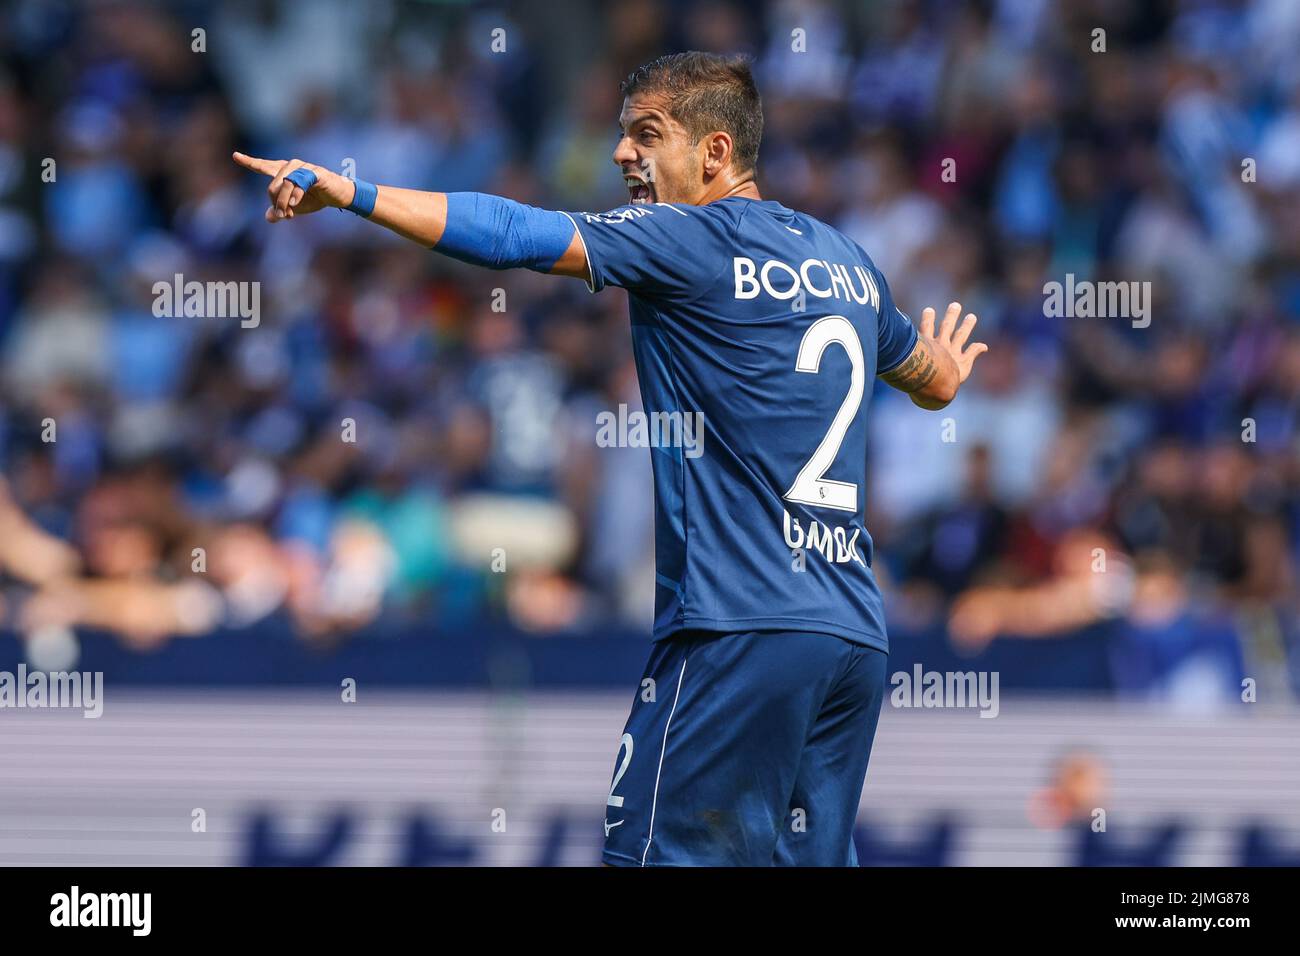 Bochum, Germany. 06th Aug, 2022. Soccer: Bundesliga, VfL Bochum - FSV Mainz 05, Matchday 1, Vonovia Ruhrstadion. Cristian Gamboa of VfL Bochum gives instructions to his colleagues. Credit: Tim Rehbein/dpa - IMPORTANT NOTE: In accordance with the requirements of the DFL Deutsche Fußball Liga and the DFB Deutscher Fußball-Bund, it is prohibited to use or have used photographs taken in the stadium and/or of the match in the form of sequence pictures and/or video-like photo series./dpa/Alamy Live News Stock Photo